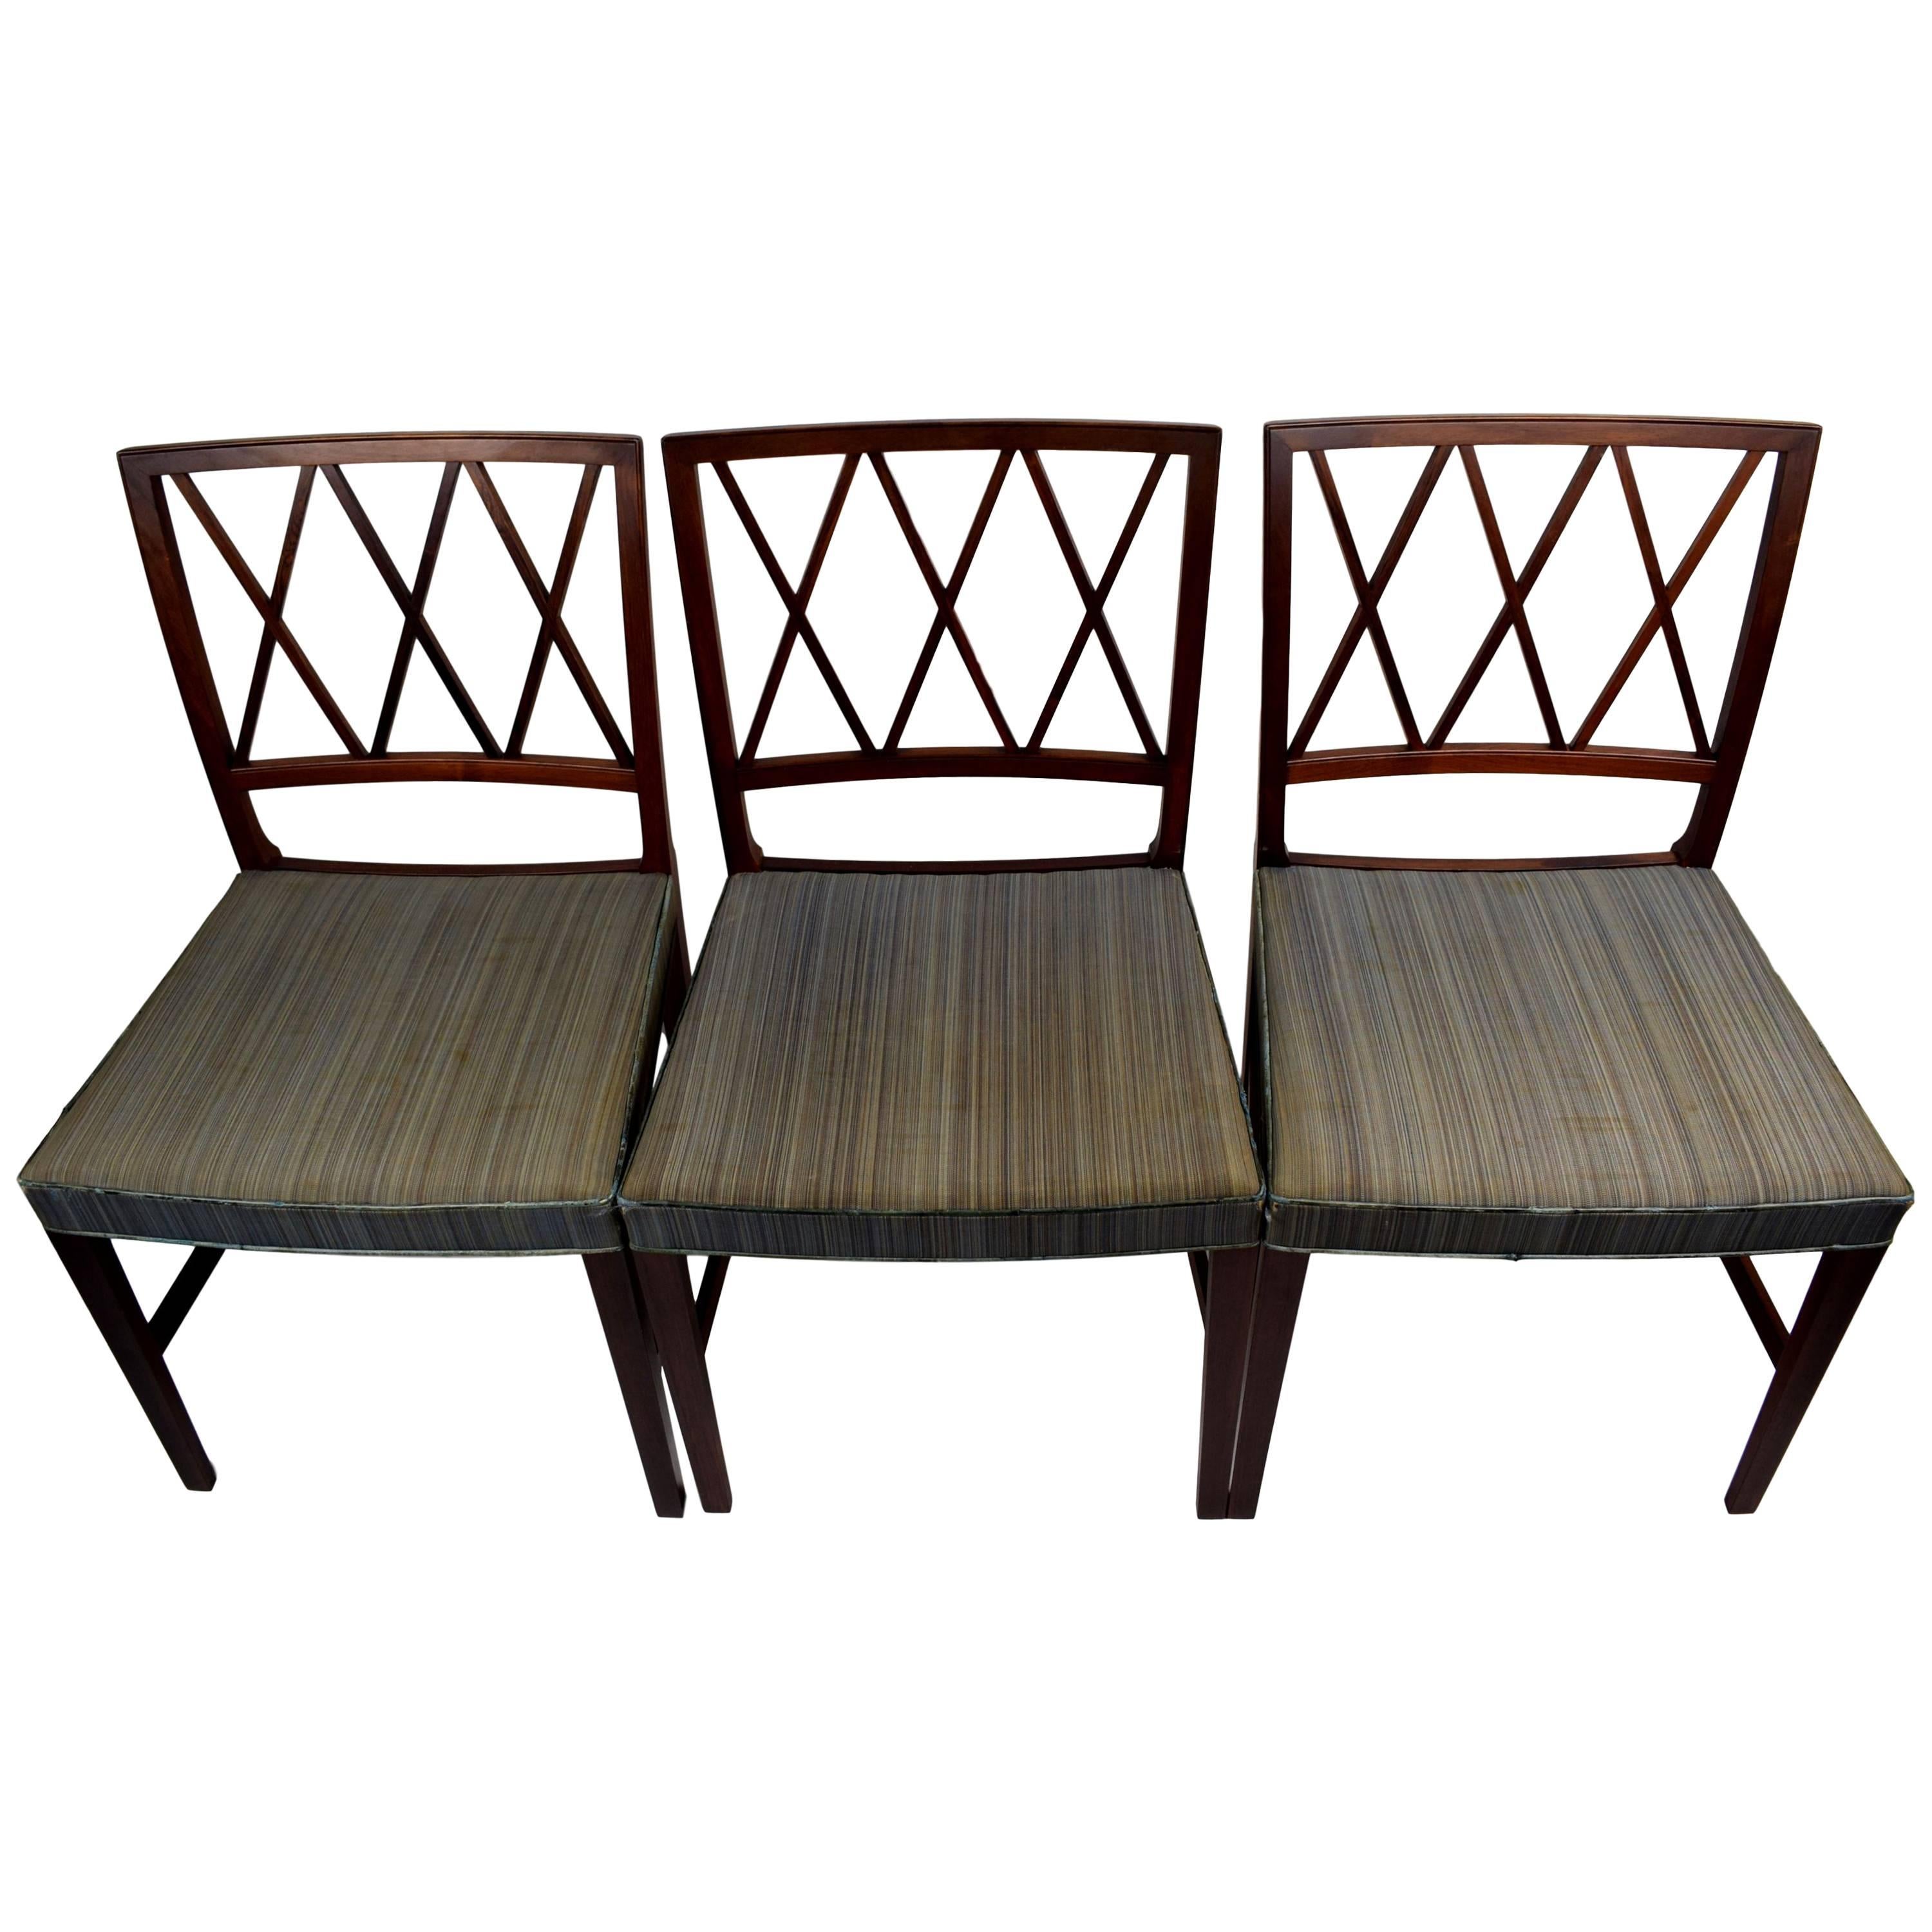 Three Early Midcentury Rosewood Dining Chairs by Ole Wanscher, A.J. Iversen